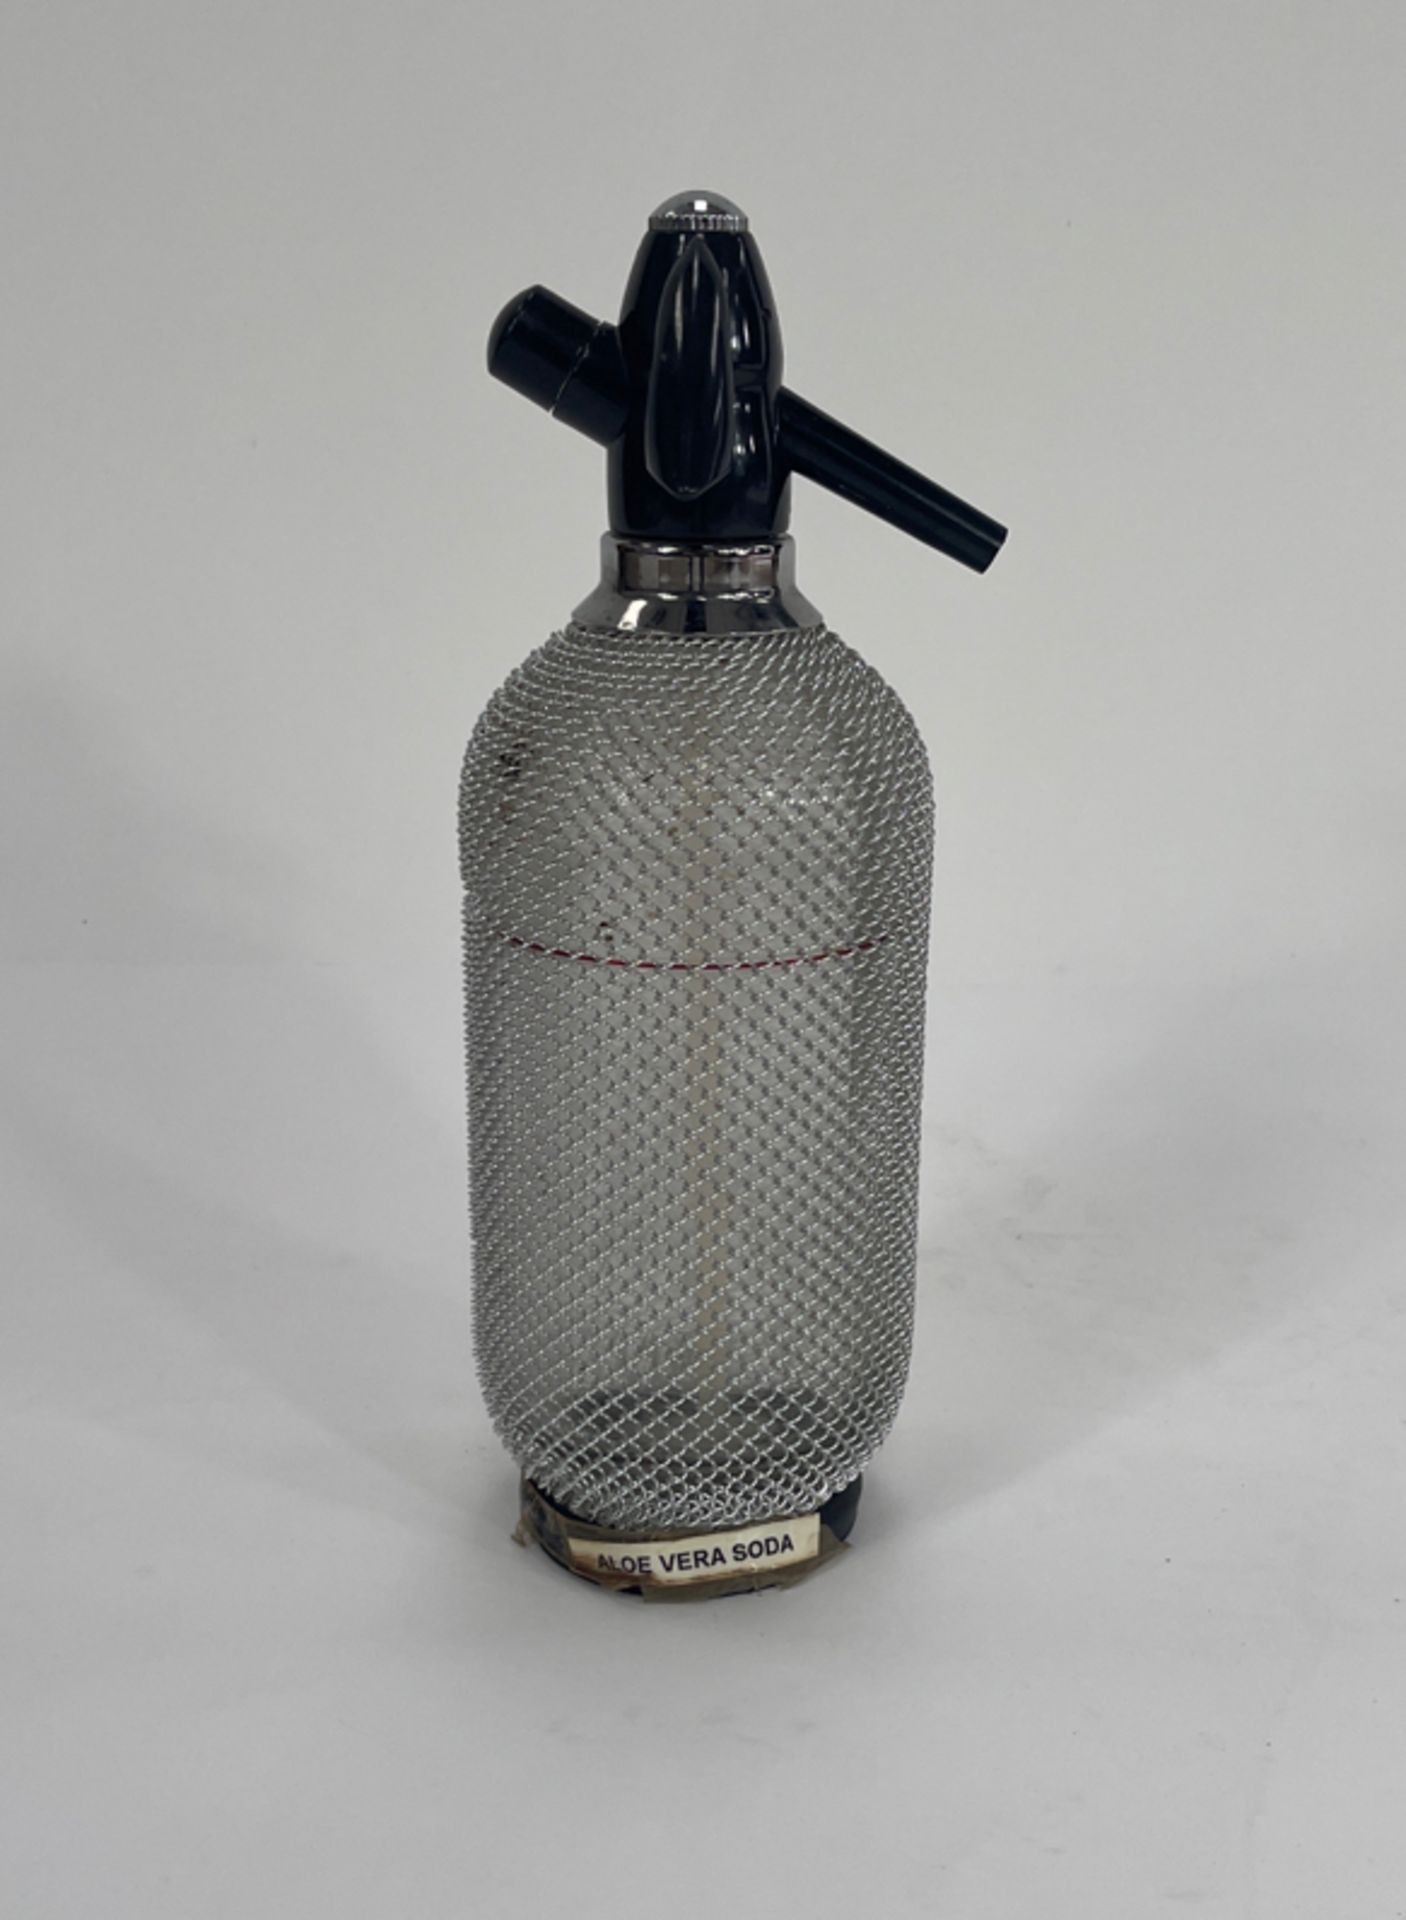 Aloe Vera Vibtage Classic Soda Siphon Seltzer Glass Bottle With Wire Mesh - Image 3 of 4